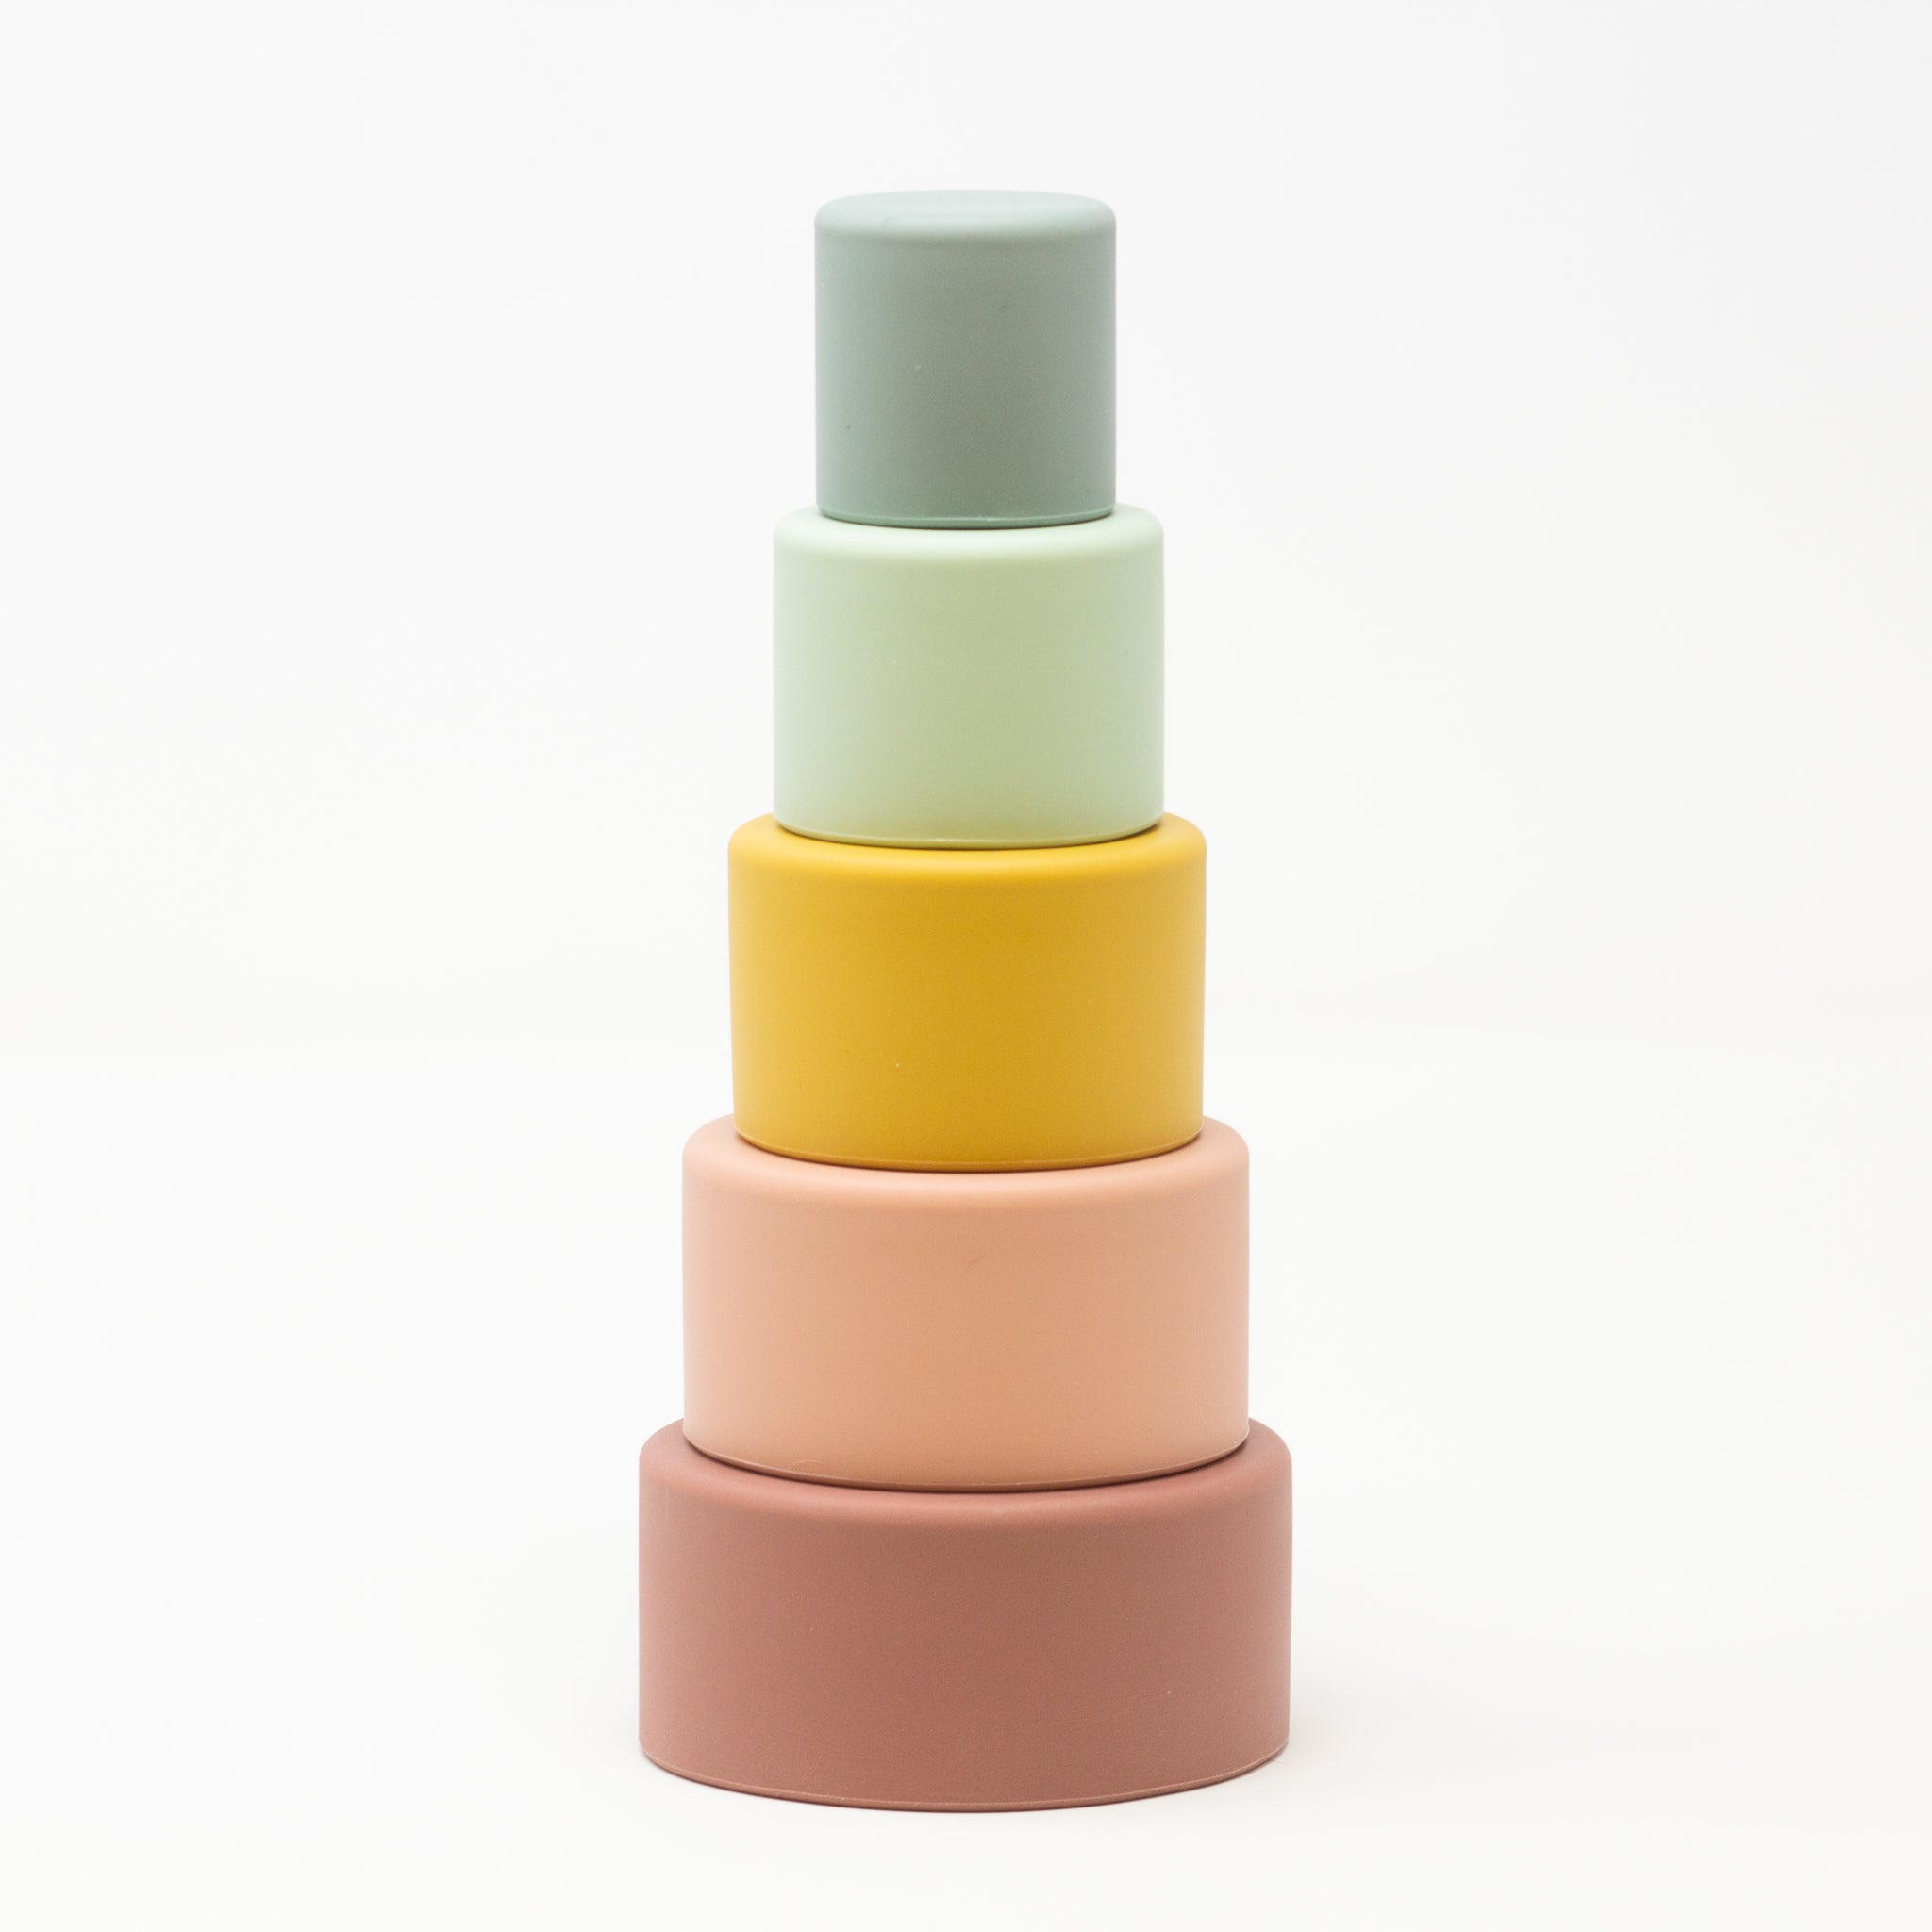 Silicone Stacking Bowls